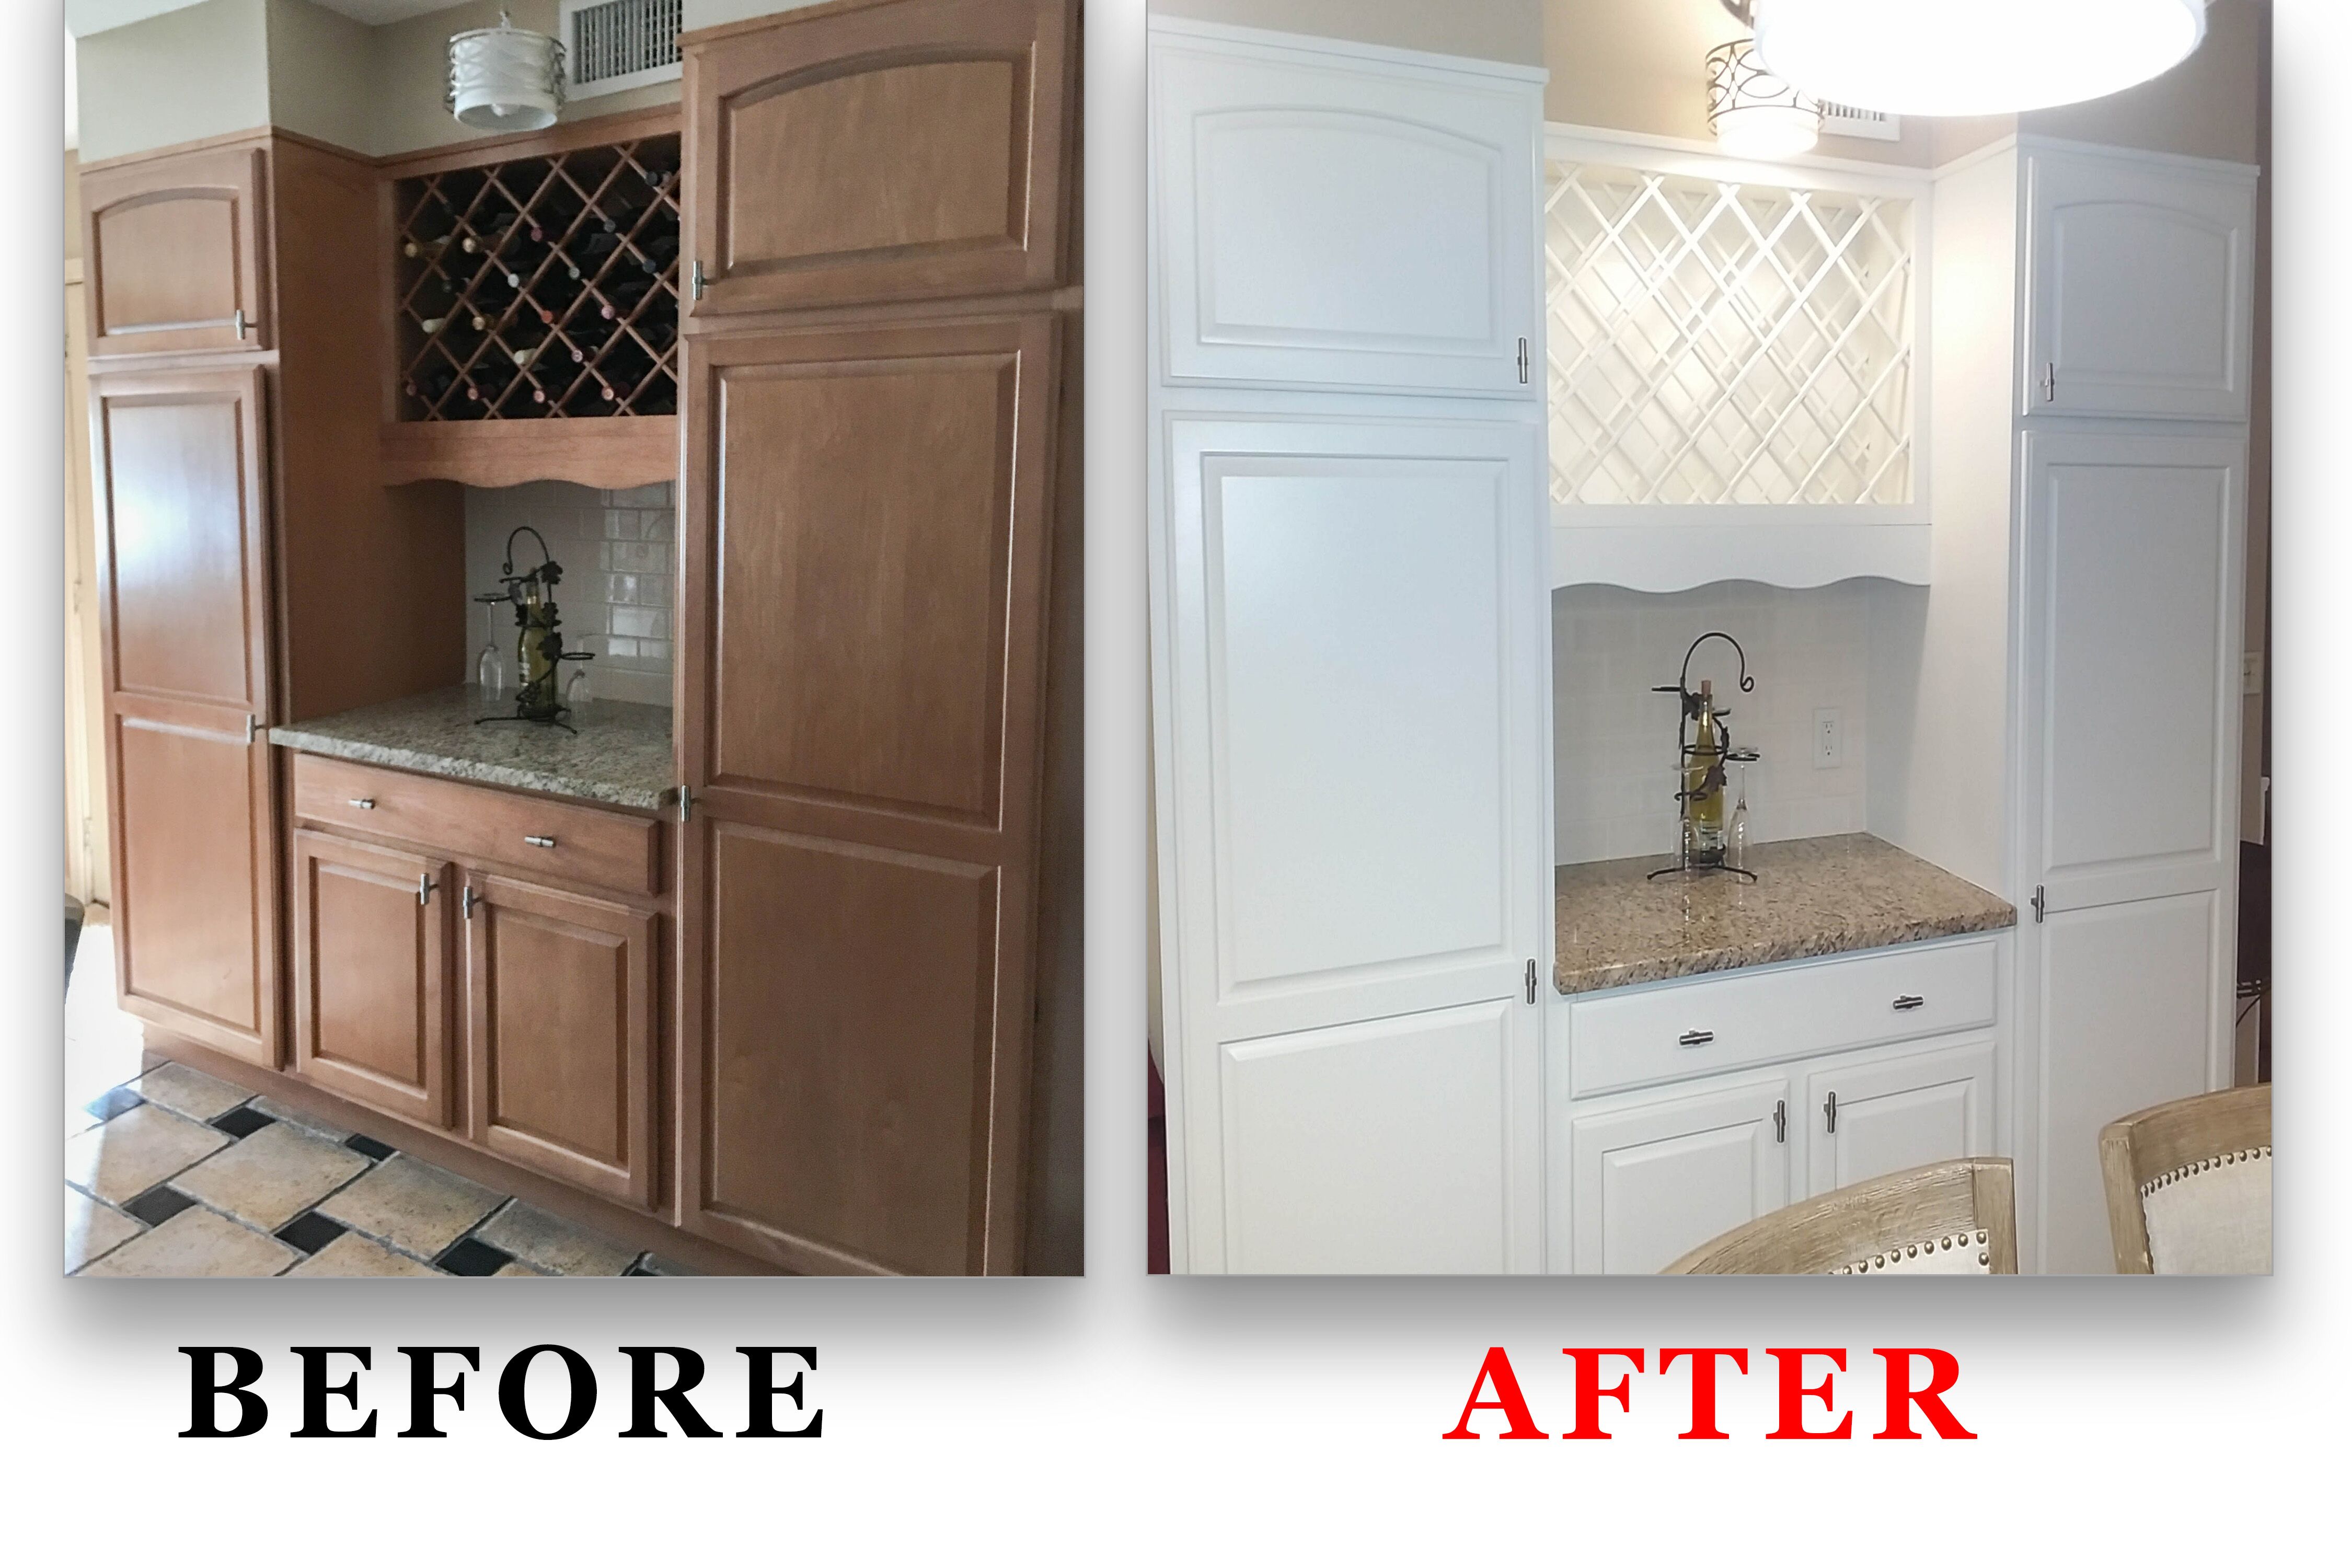 Kitchen Cabinet Painting Before And After Kitchen Cabinet Refinishing Before And After Spray Painting Kitchen Cabinets Before And After Http Kitchencabinet Painter Com Gallery Before After